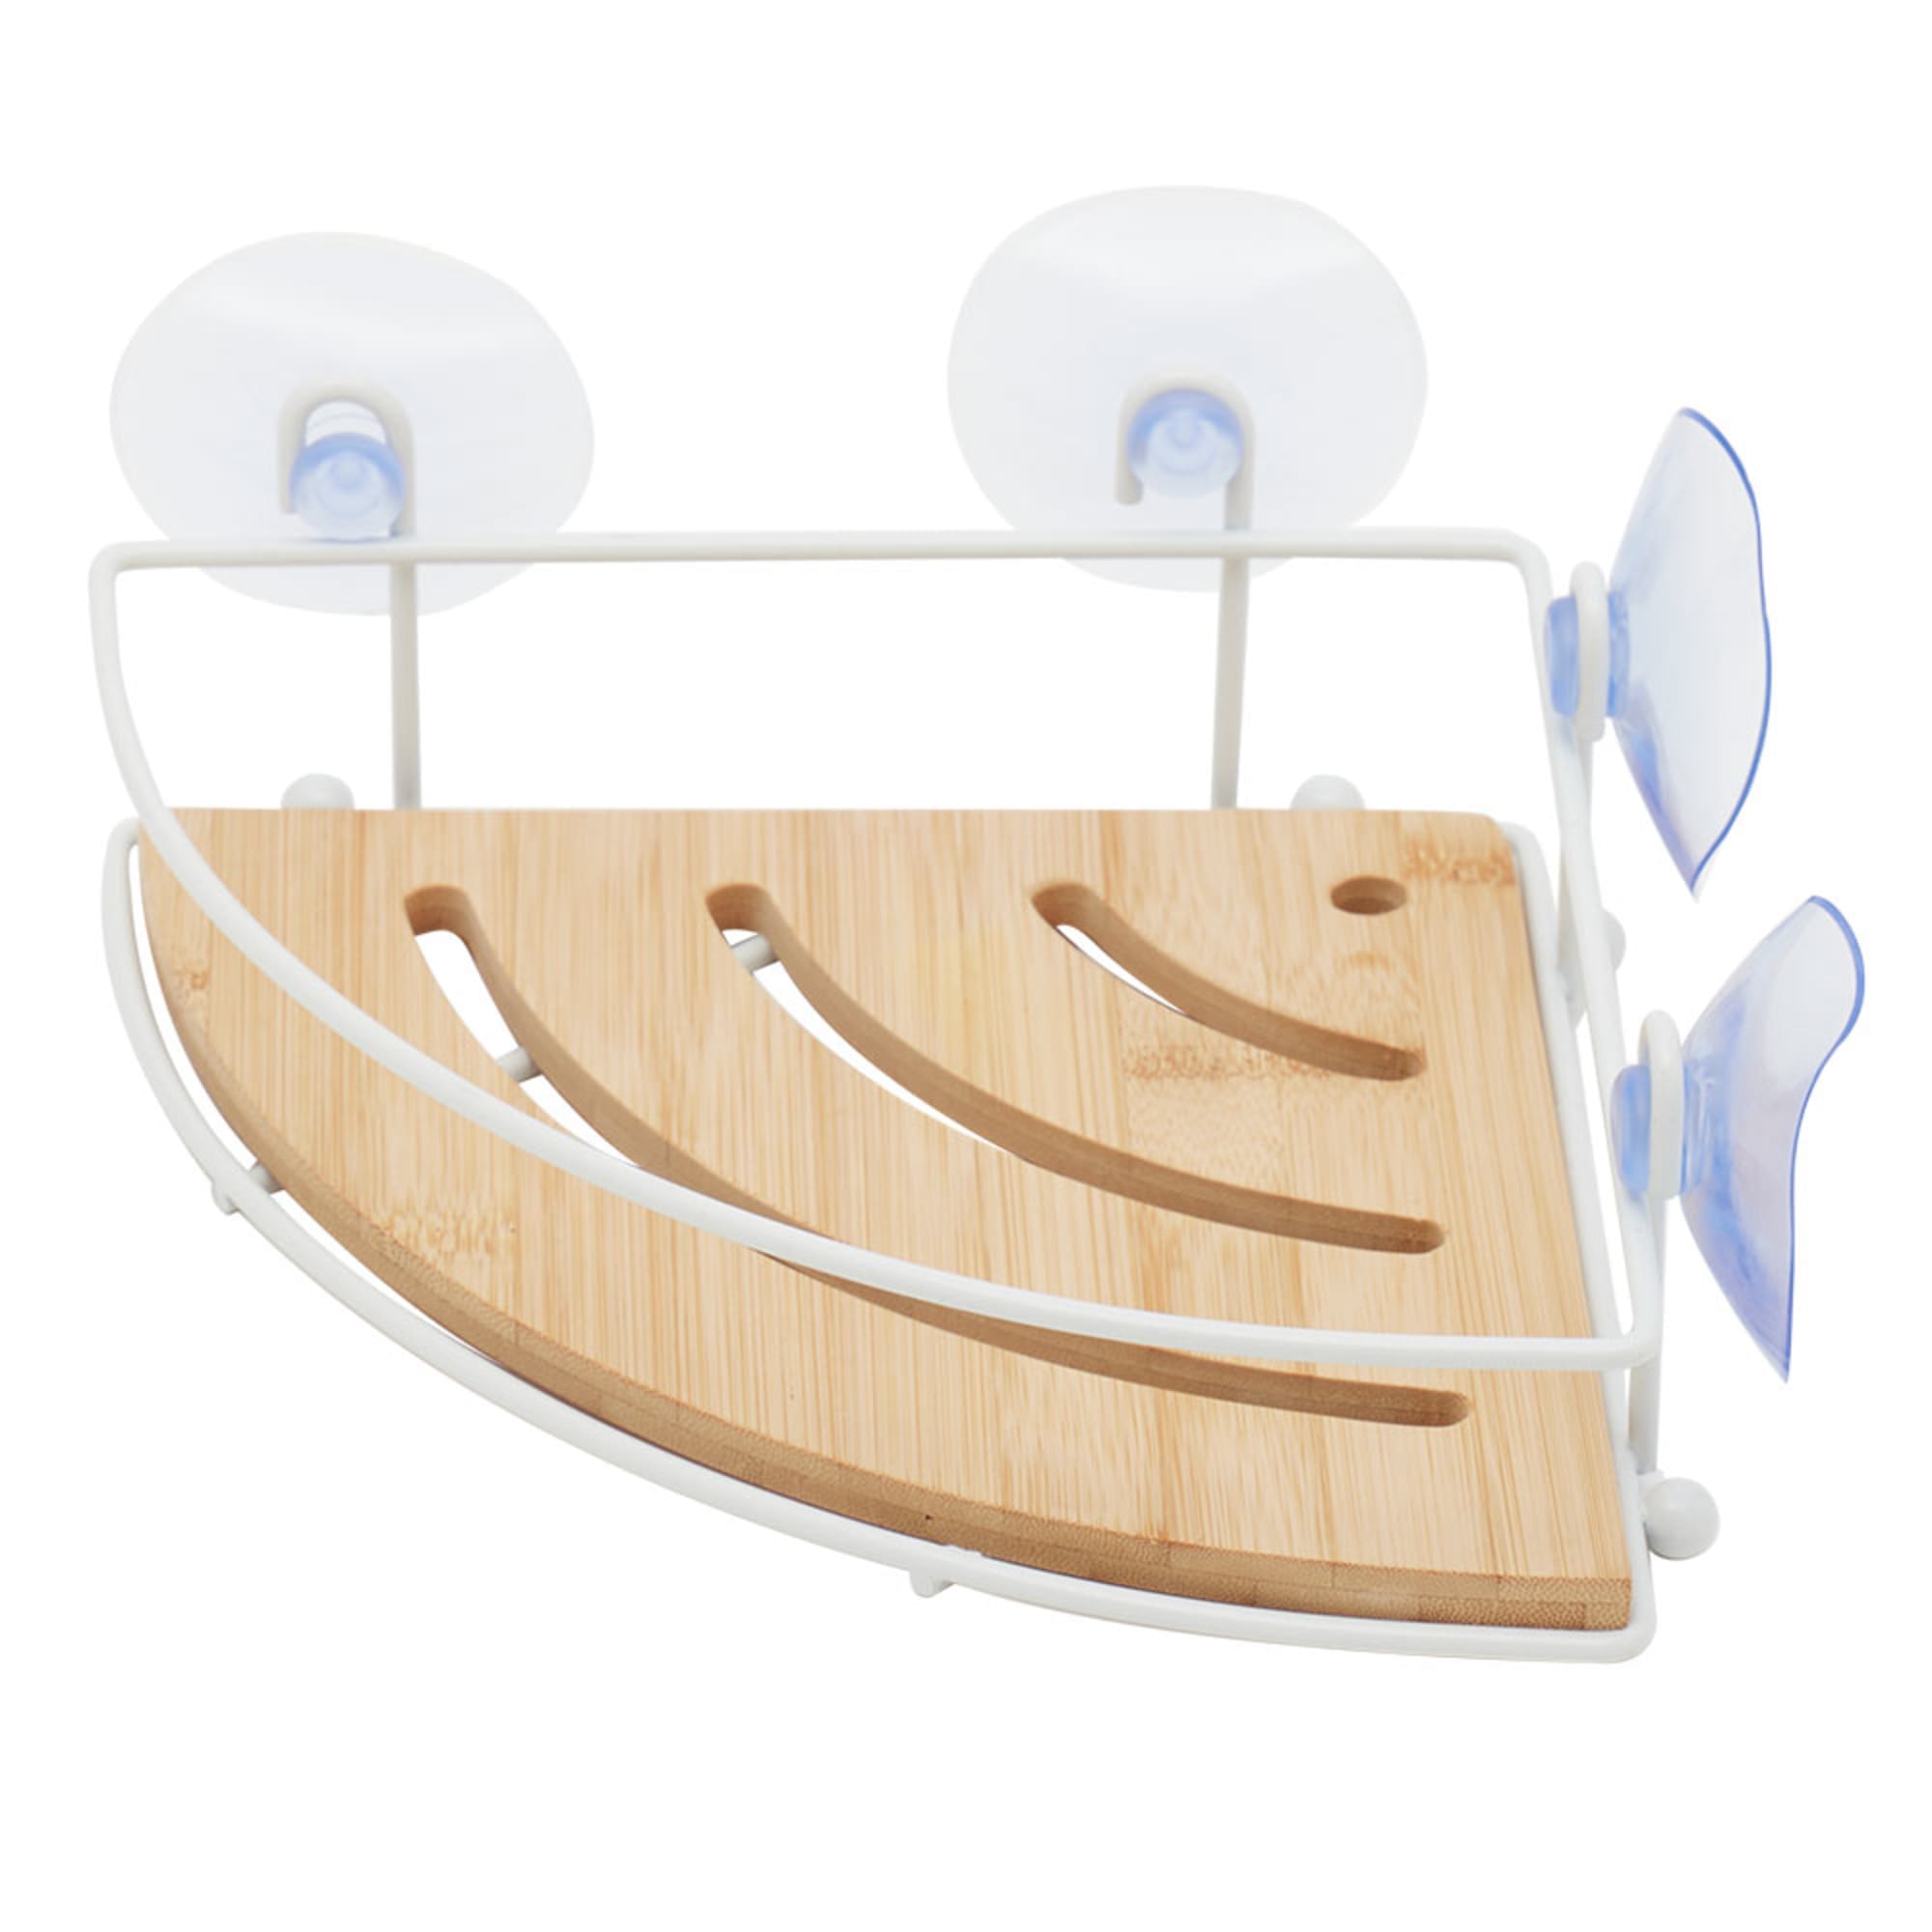 Home Basics Bamboo Shower Corner Caddy with 4 Suction Cups, Natural $4.00 EACH, CASE PACK OF 12